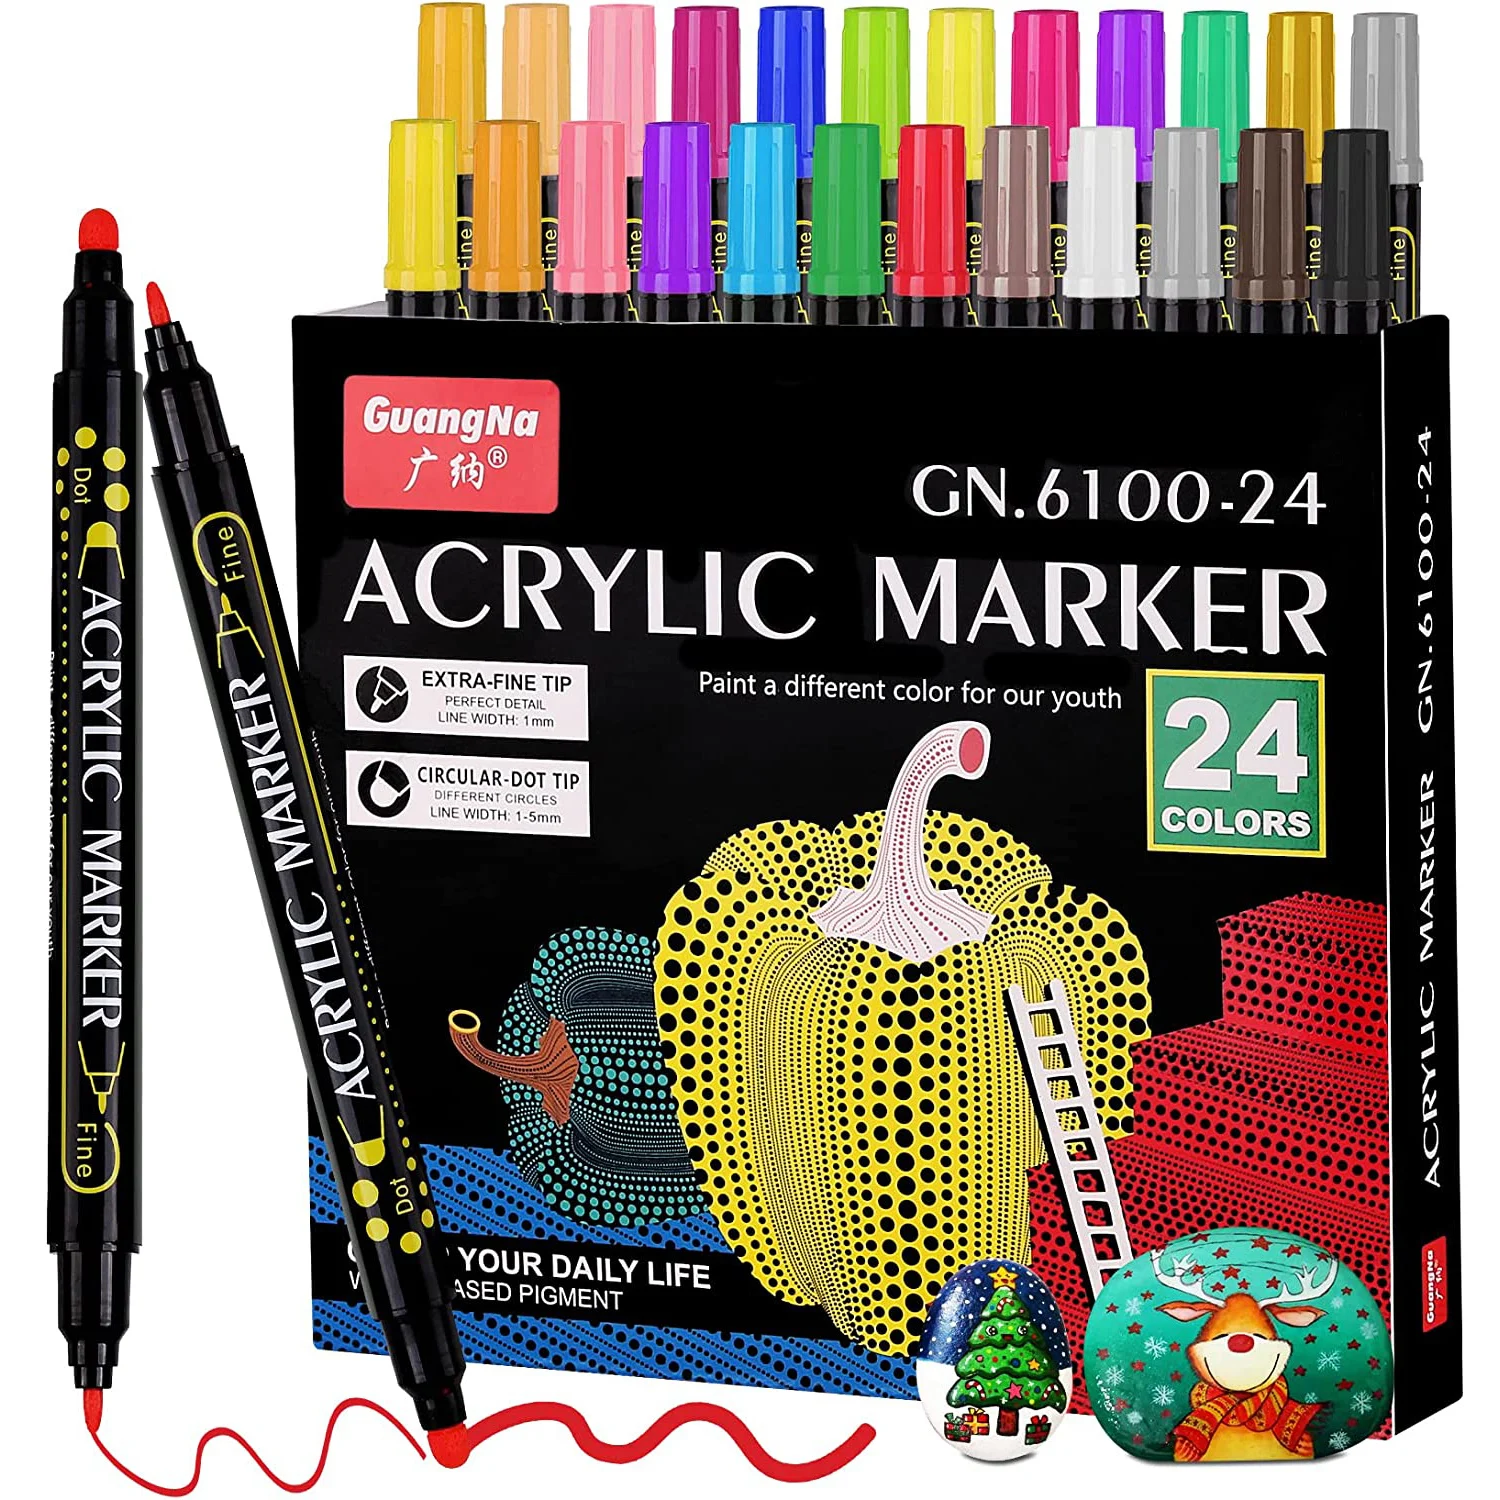 https://ae01.alicdn.com/kf/S523919bf885a48ef9859da41bdb6caebi/36-Colors-Art-Markers-Acrylic-Paint-Pens-Brush-Round-Tip-Acrylic-Maker-for-Adult-Coloring-Book.jpg